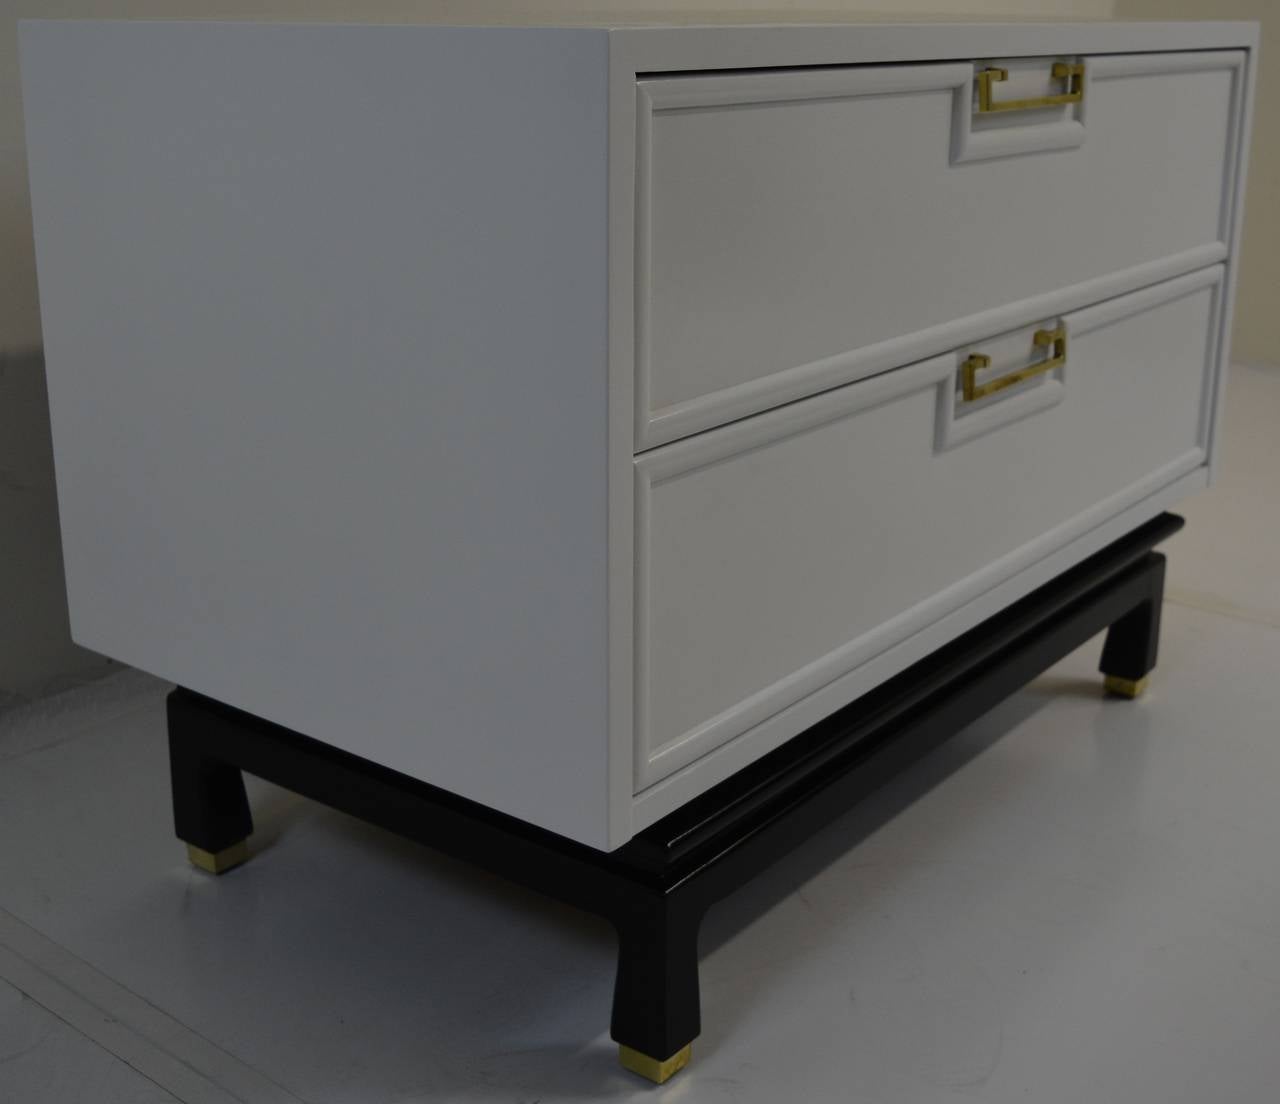 Decorative lacquered chest with brass accents manufactured by American of Martinsville. Solid brass handles and sabots pop against a white lacquer and black lacquered base. Restored condition and ready for installation.